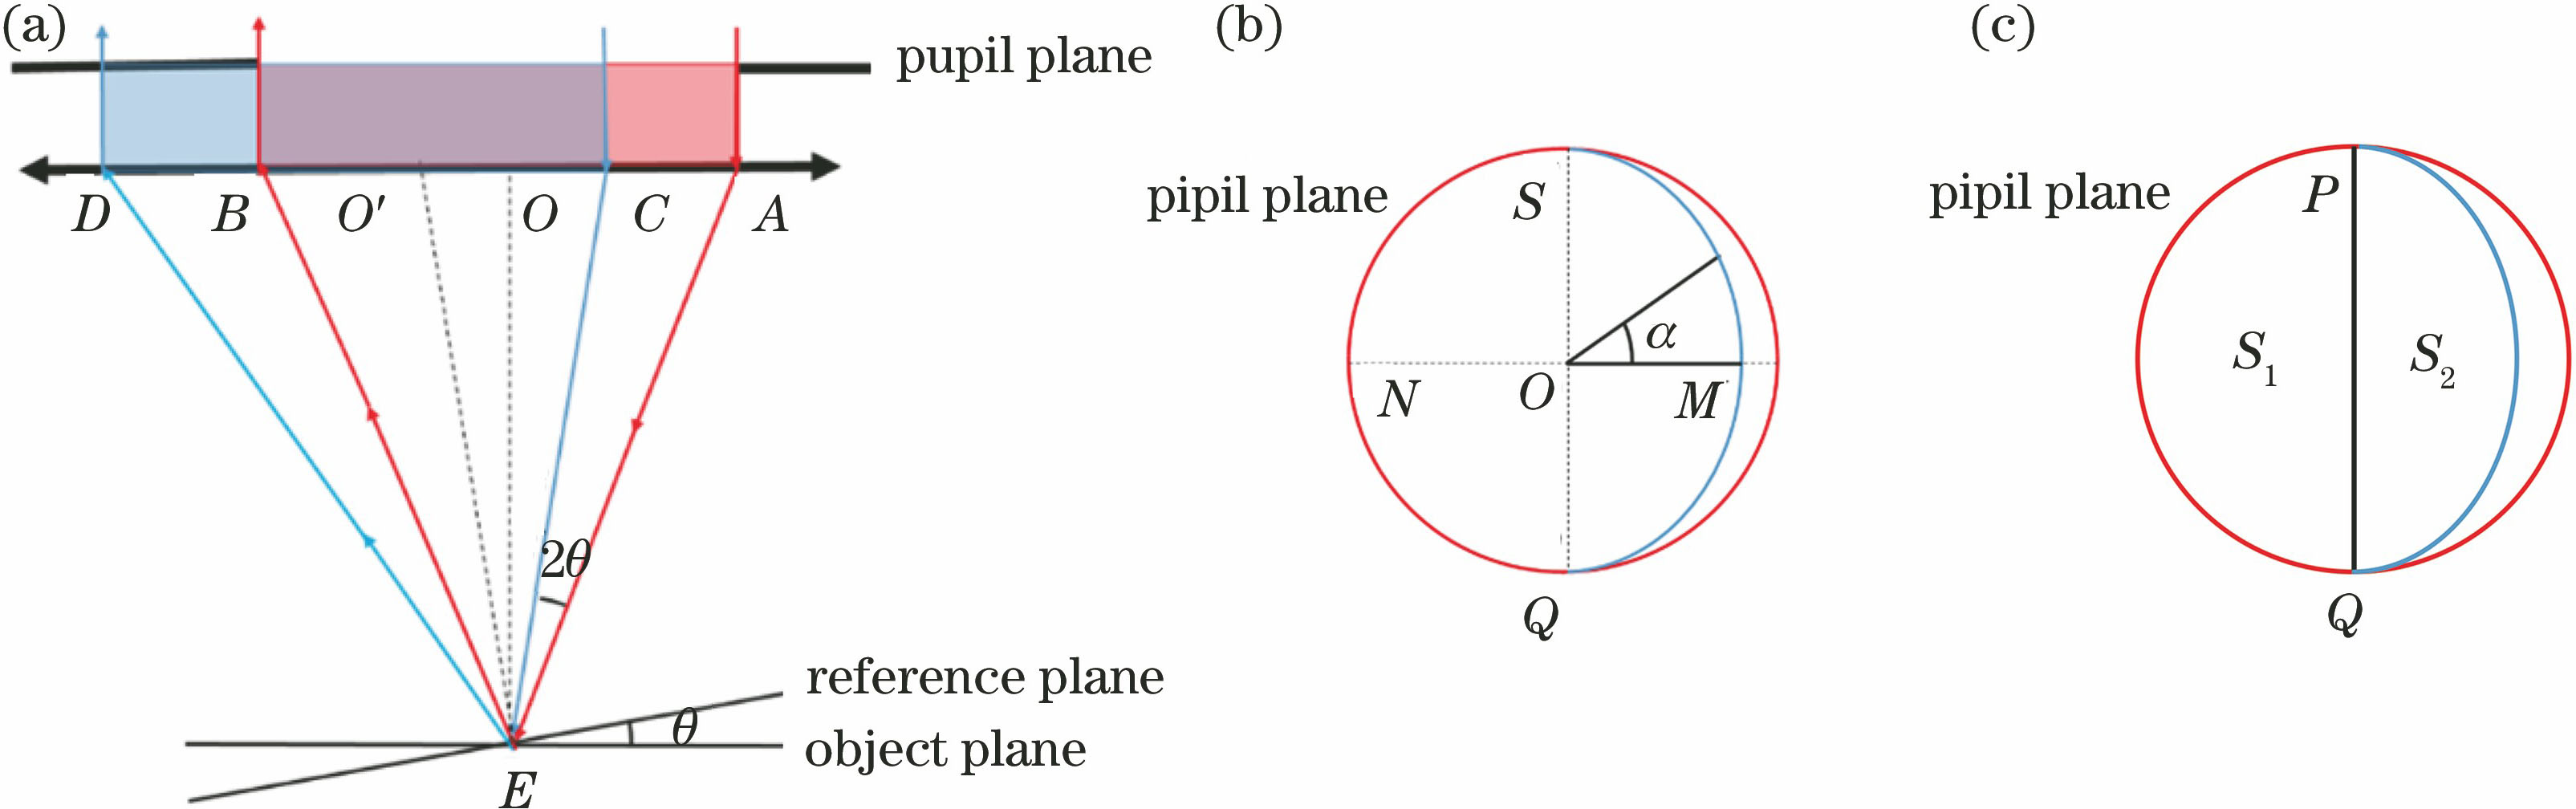 Equivalent optical path of interference-microscope objective with titled reference plate. (a) Sectional optical path of interference- microscope objective; (b) top view of pupil plane in interference-microscope objective; (c) division of S region in pupil plane